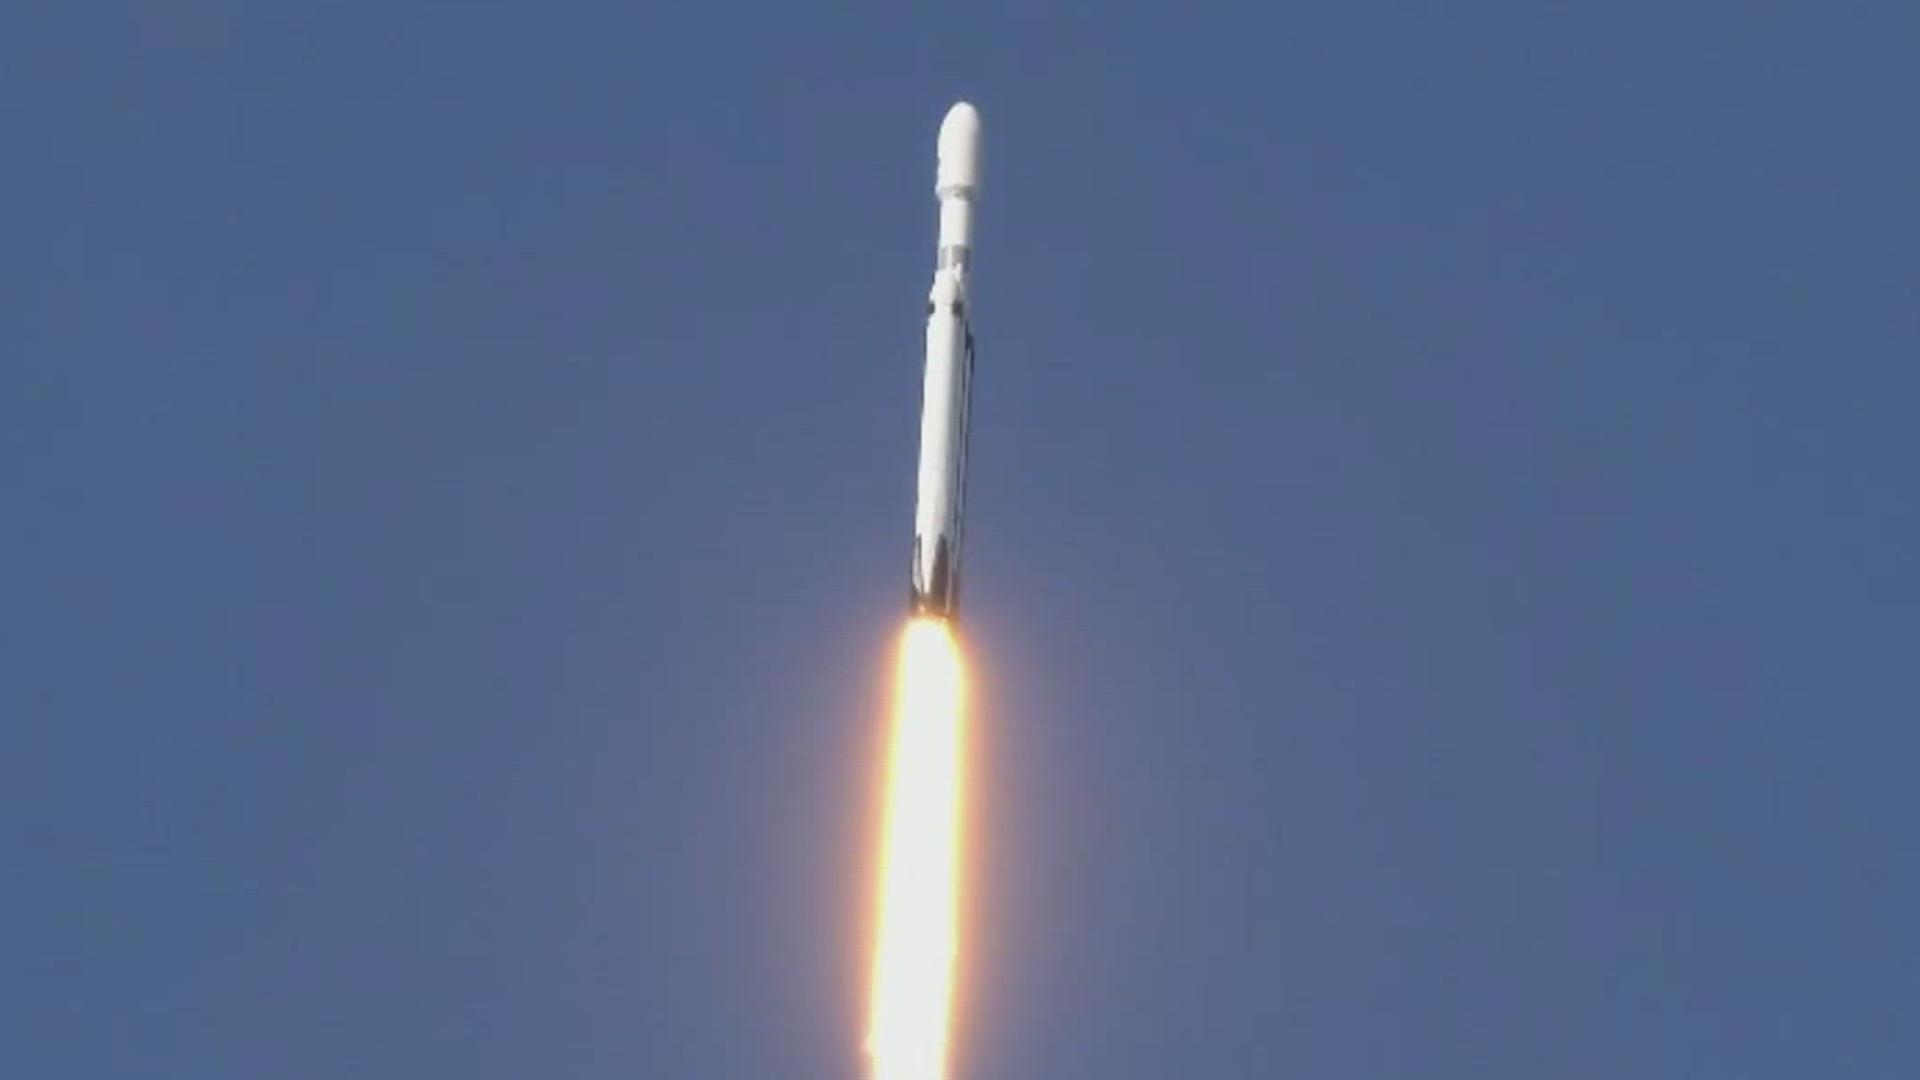 GOES-U, a new weather satellite from NOAA and NASA, launches from Kennedy Space Center.